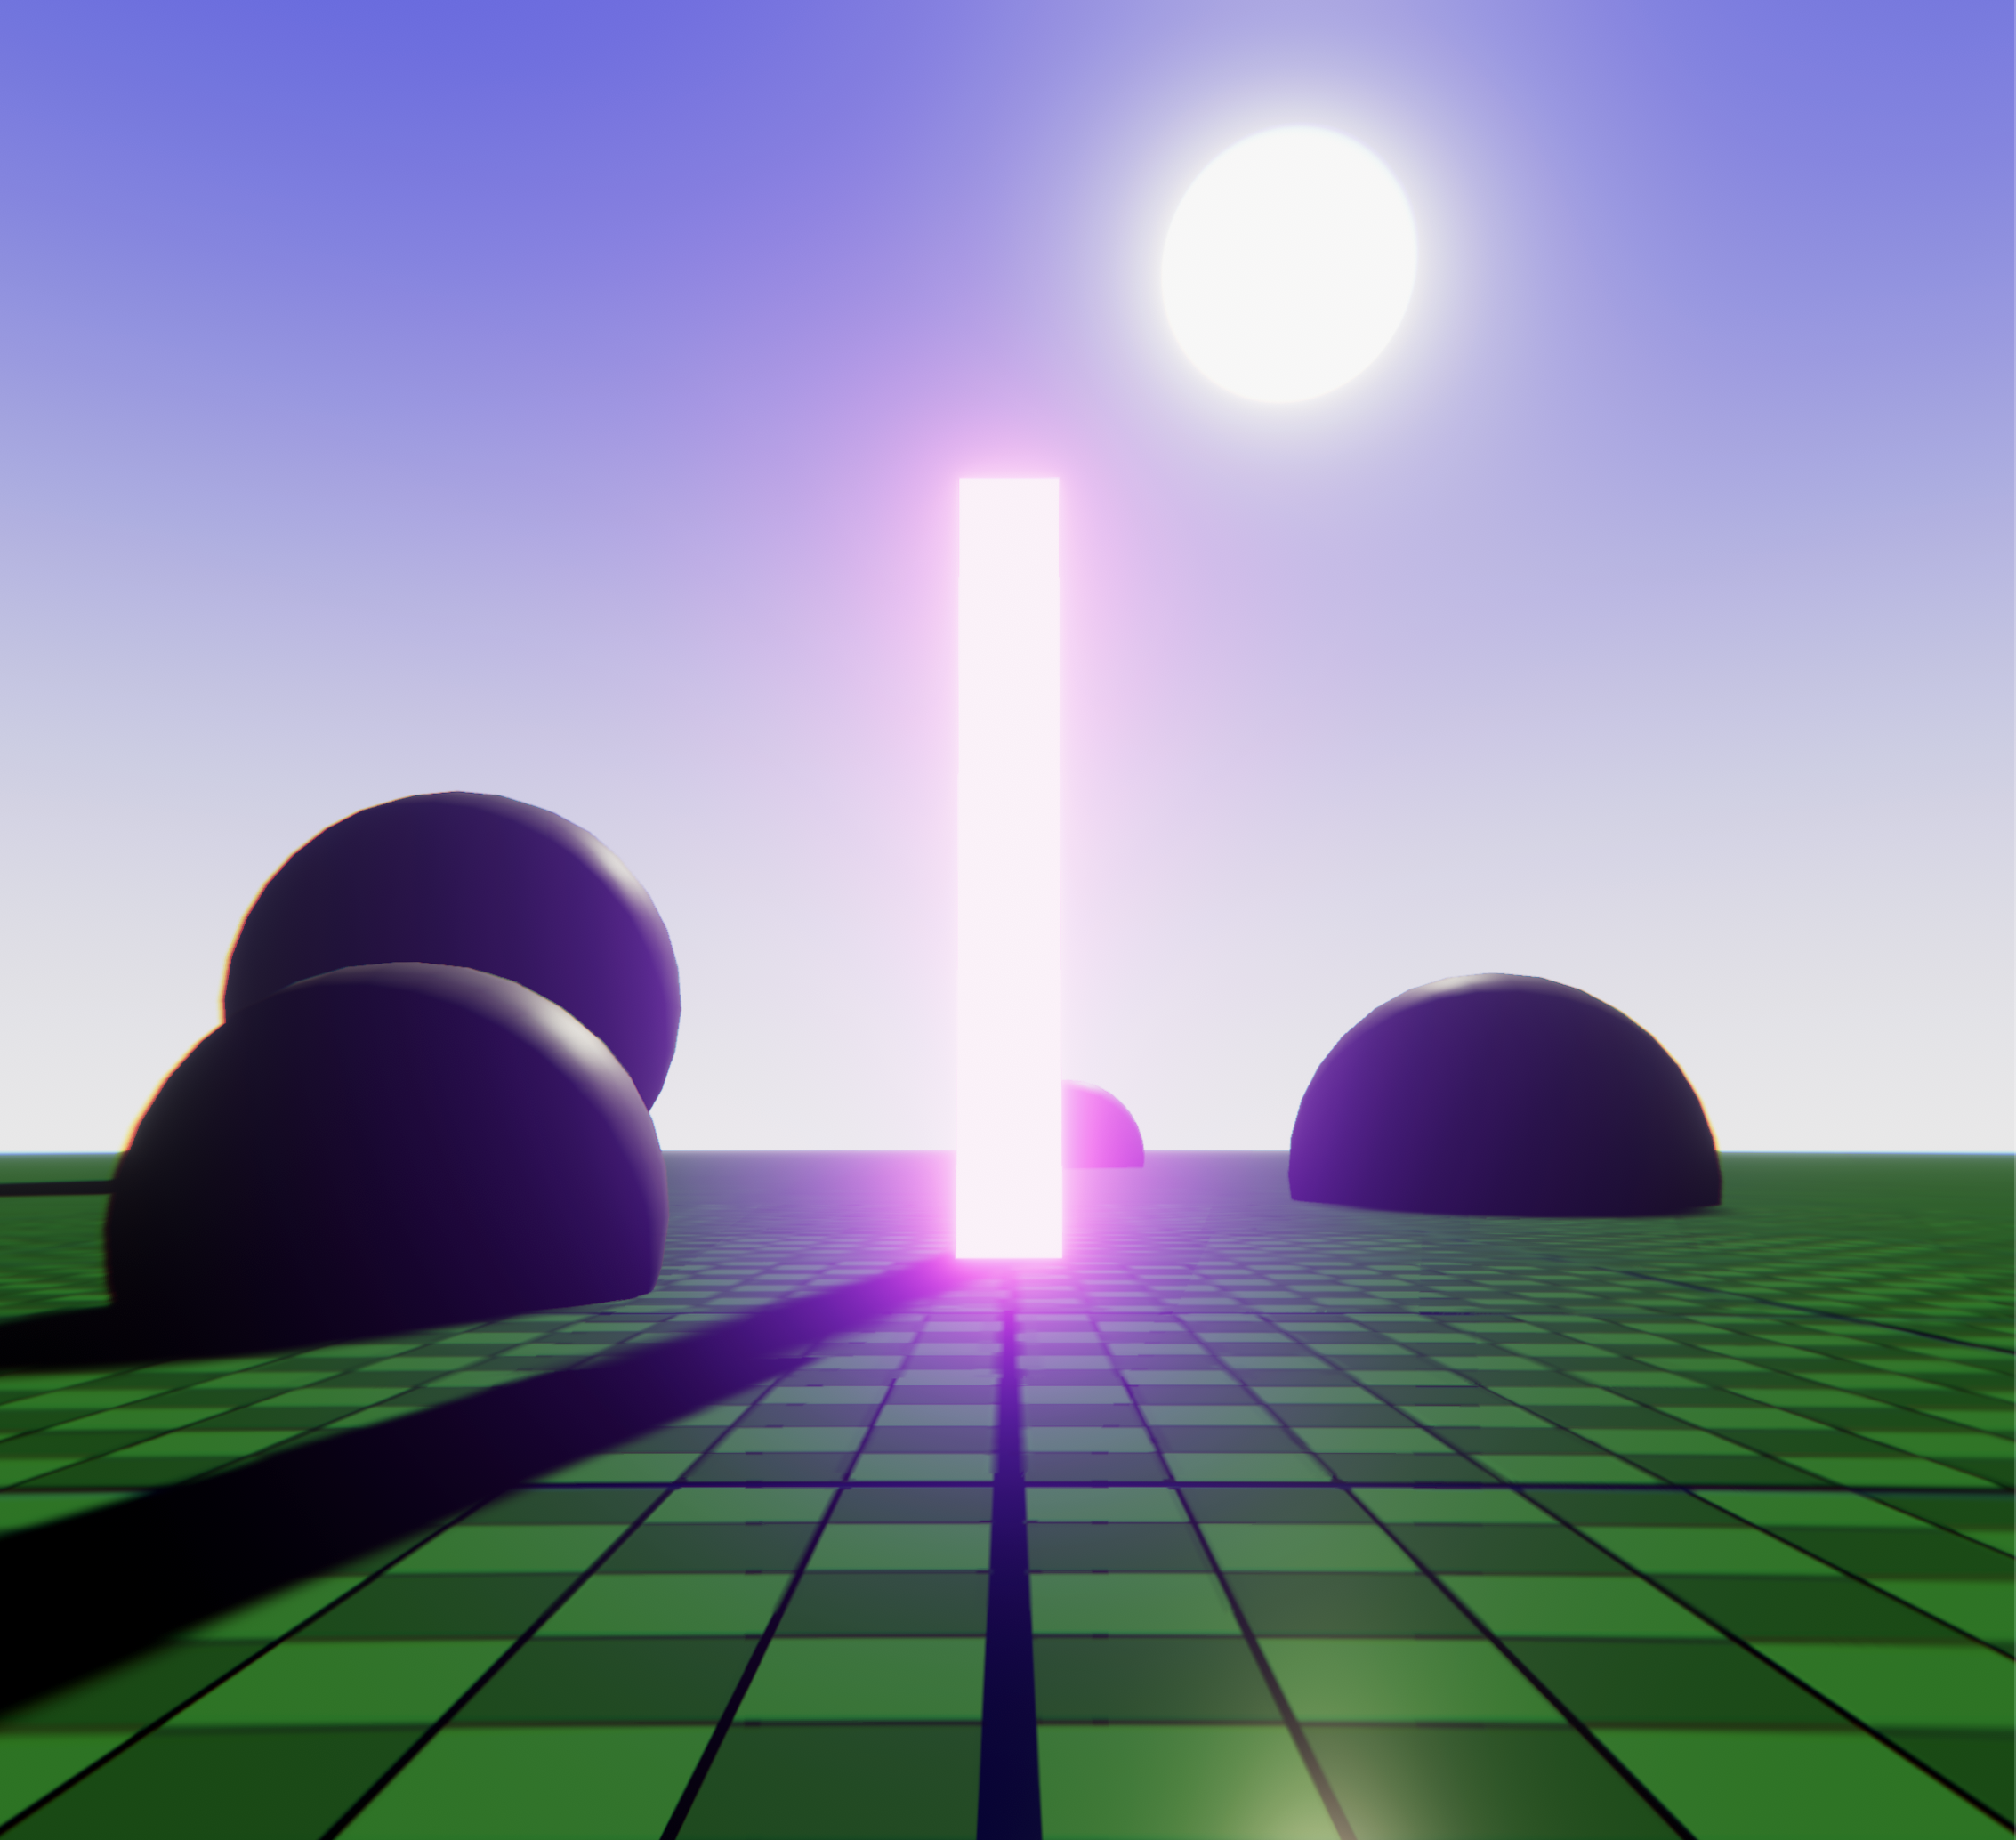 Image displaying the shader graph sun used in the game scene.